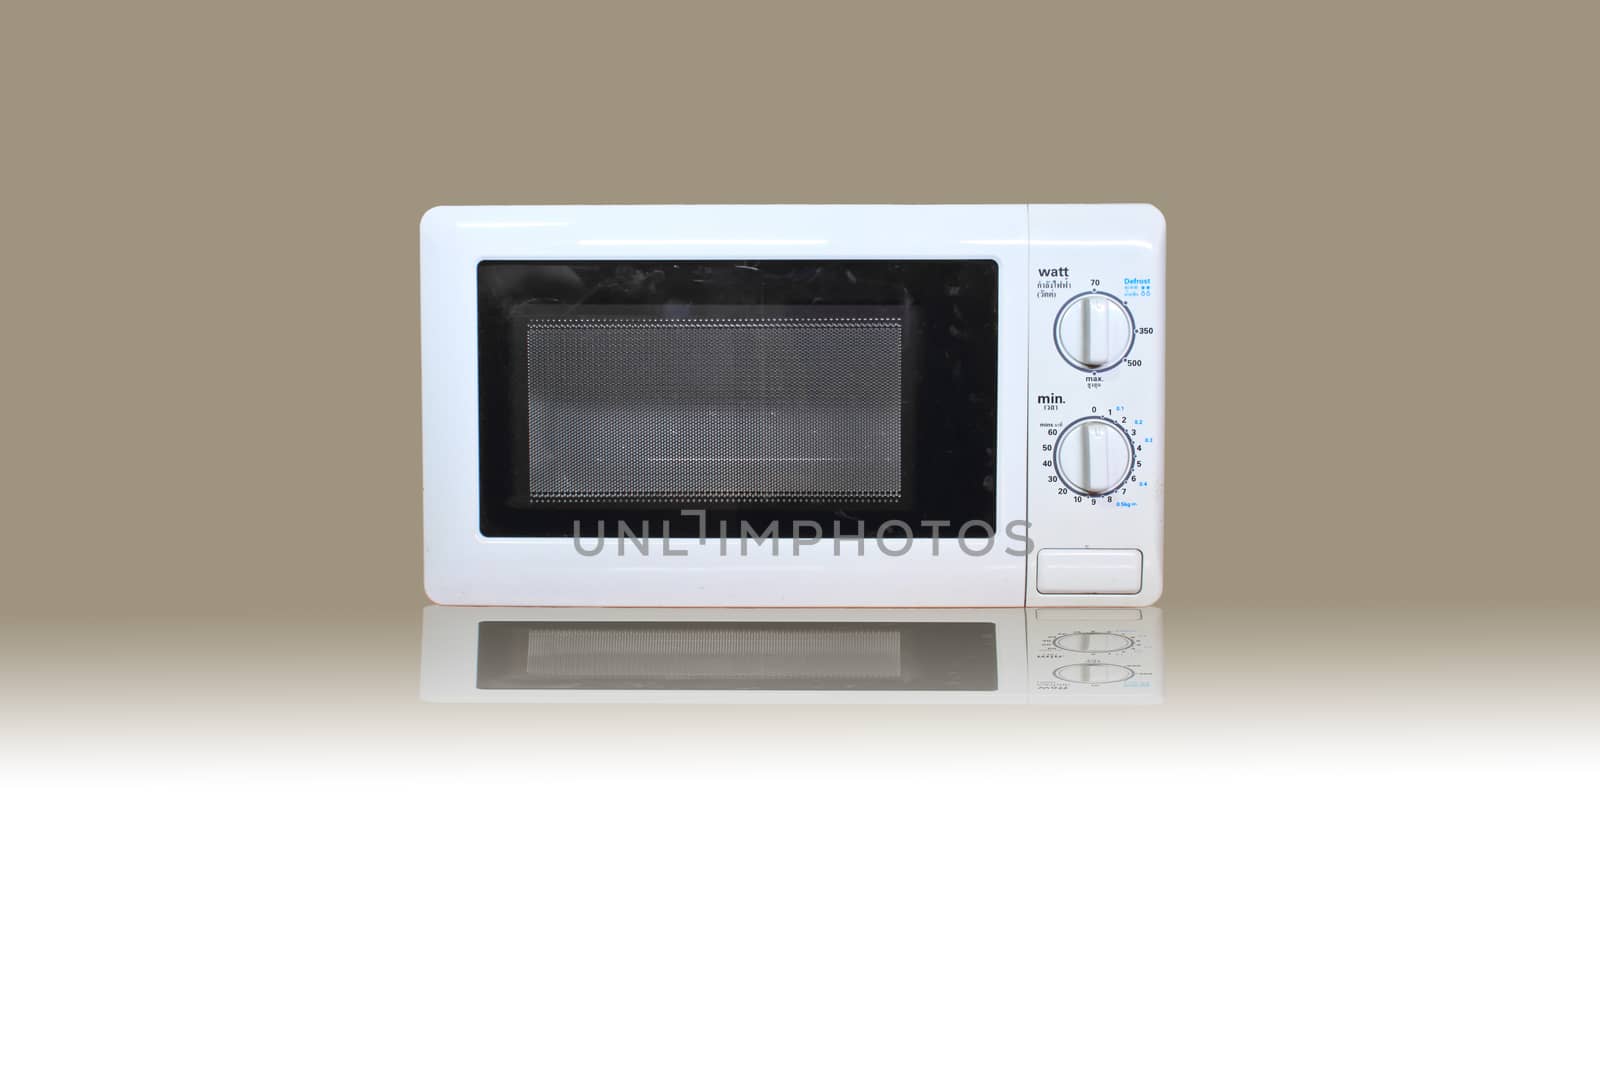 Old Microwave oven on gray and white background